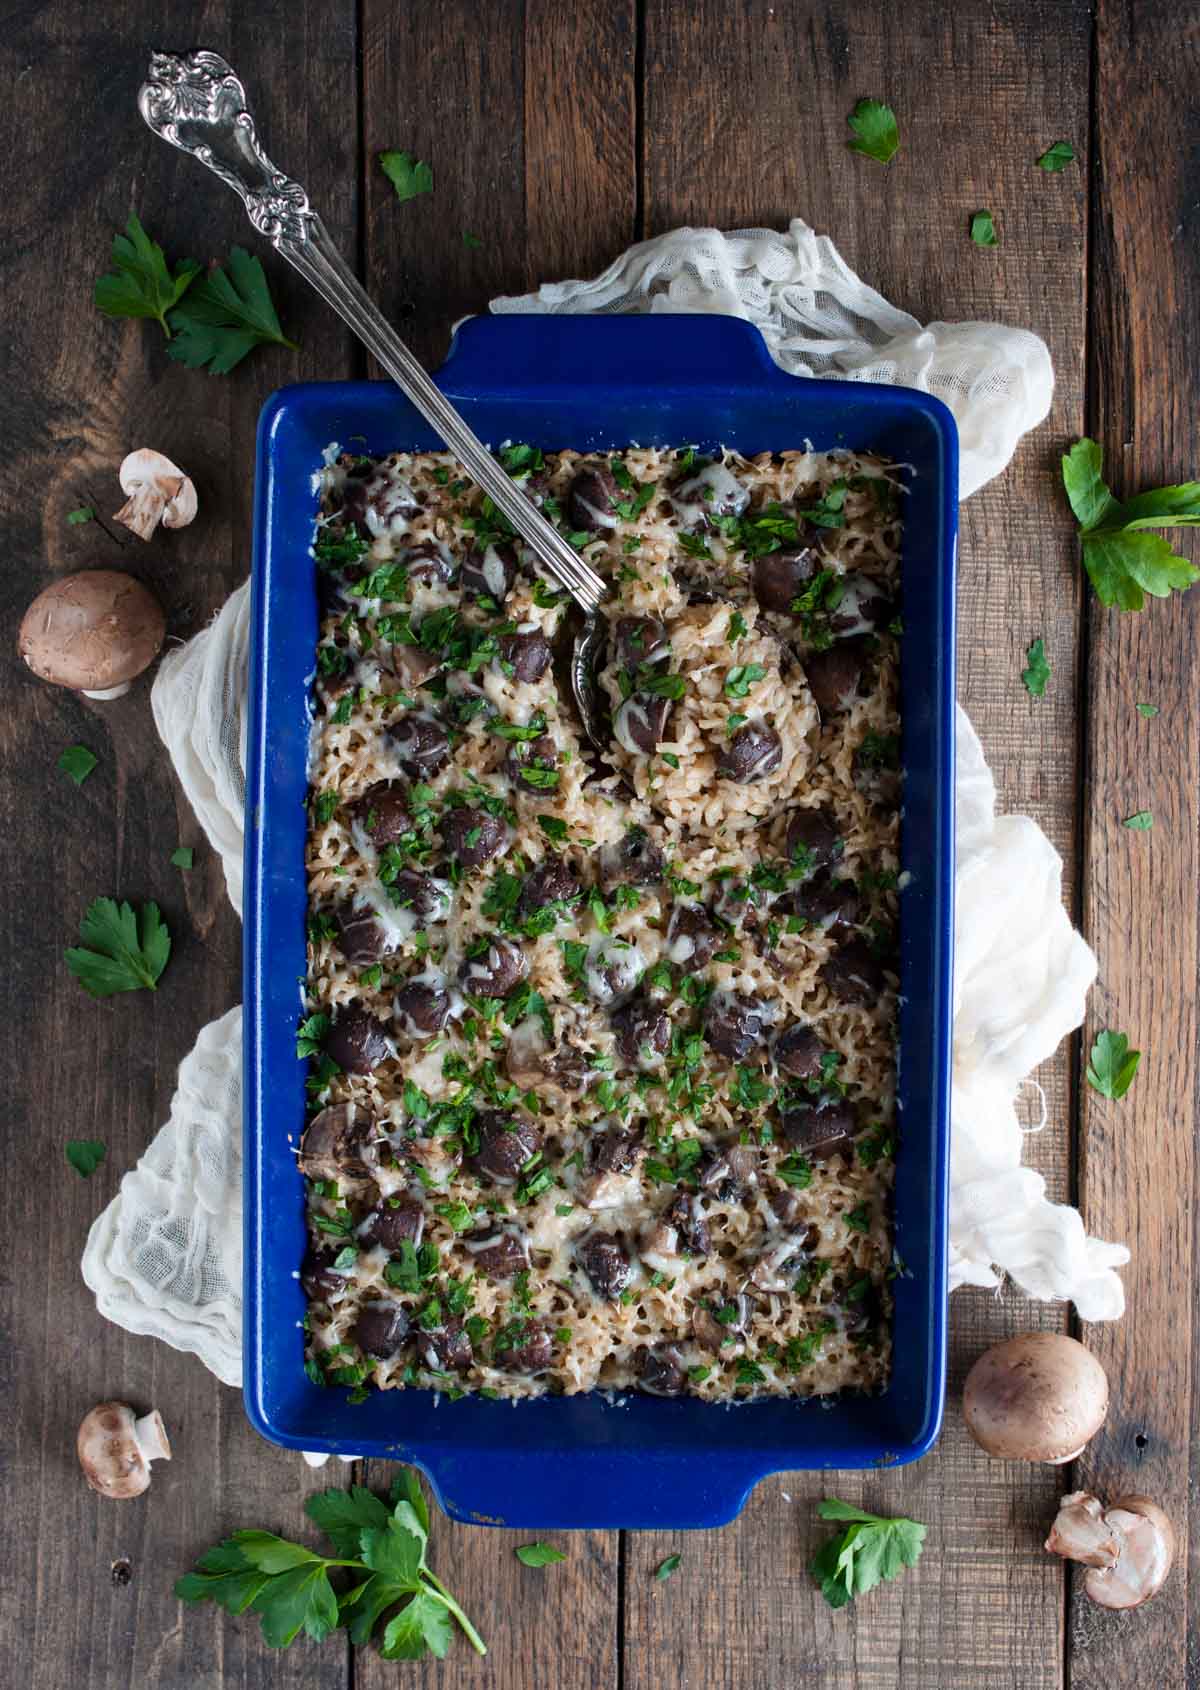 Mushroom brown rice pilaf is the perfect side dish! Its easy, filling, loaded with veggies and flexible enough to go with whatever main dish is on the menu.